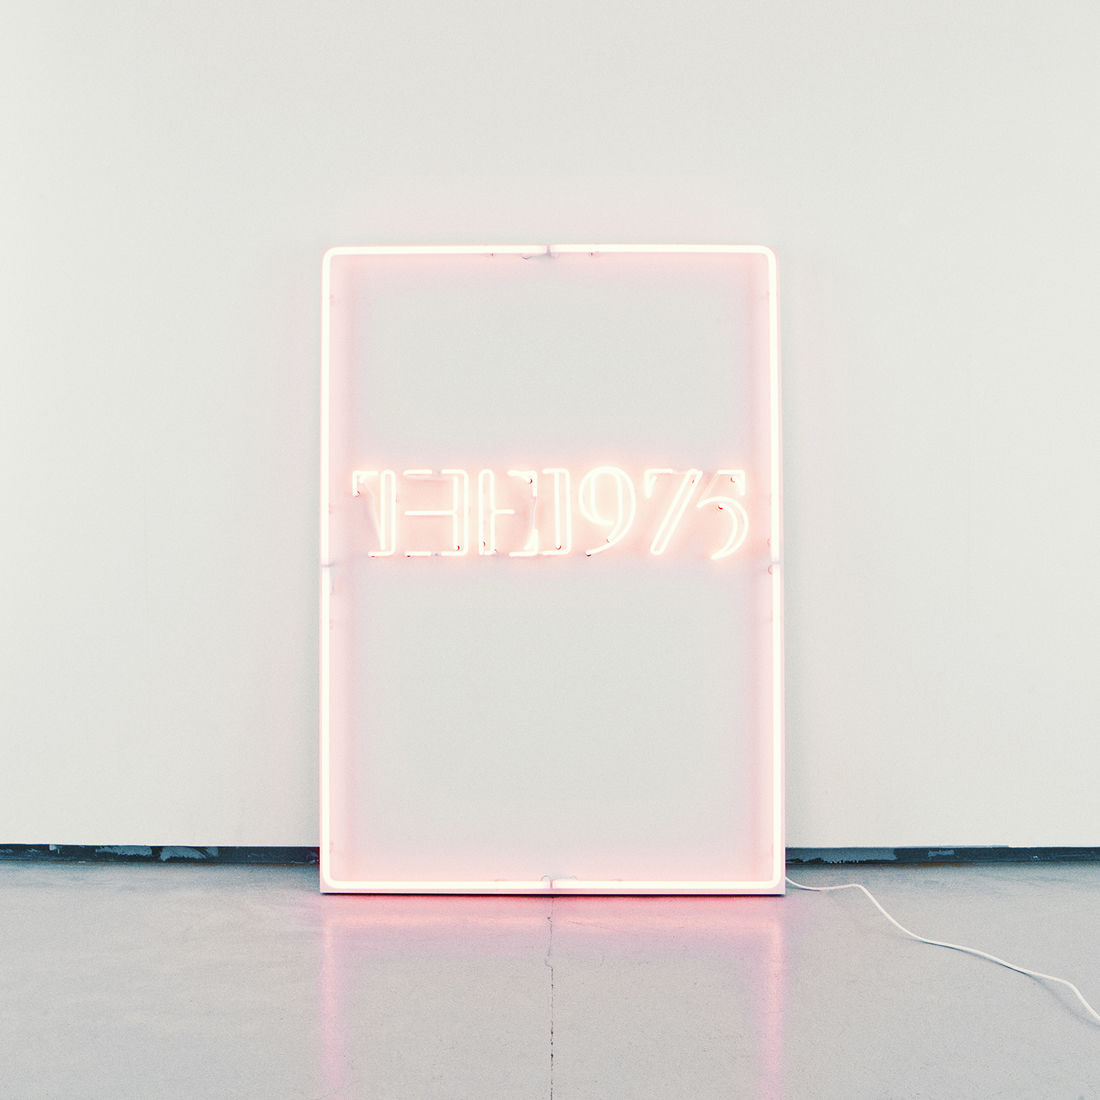 The 1975 album download i like it when you sleep I Like It When You Sleep For You Are So Beautiful Yet So Unaware Of It By The 1975 Album Review